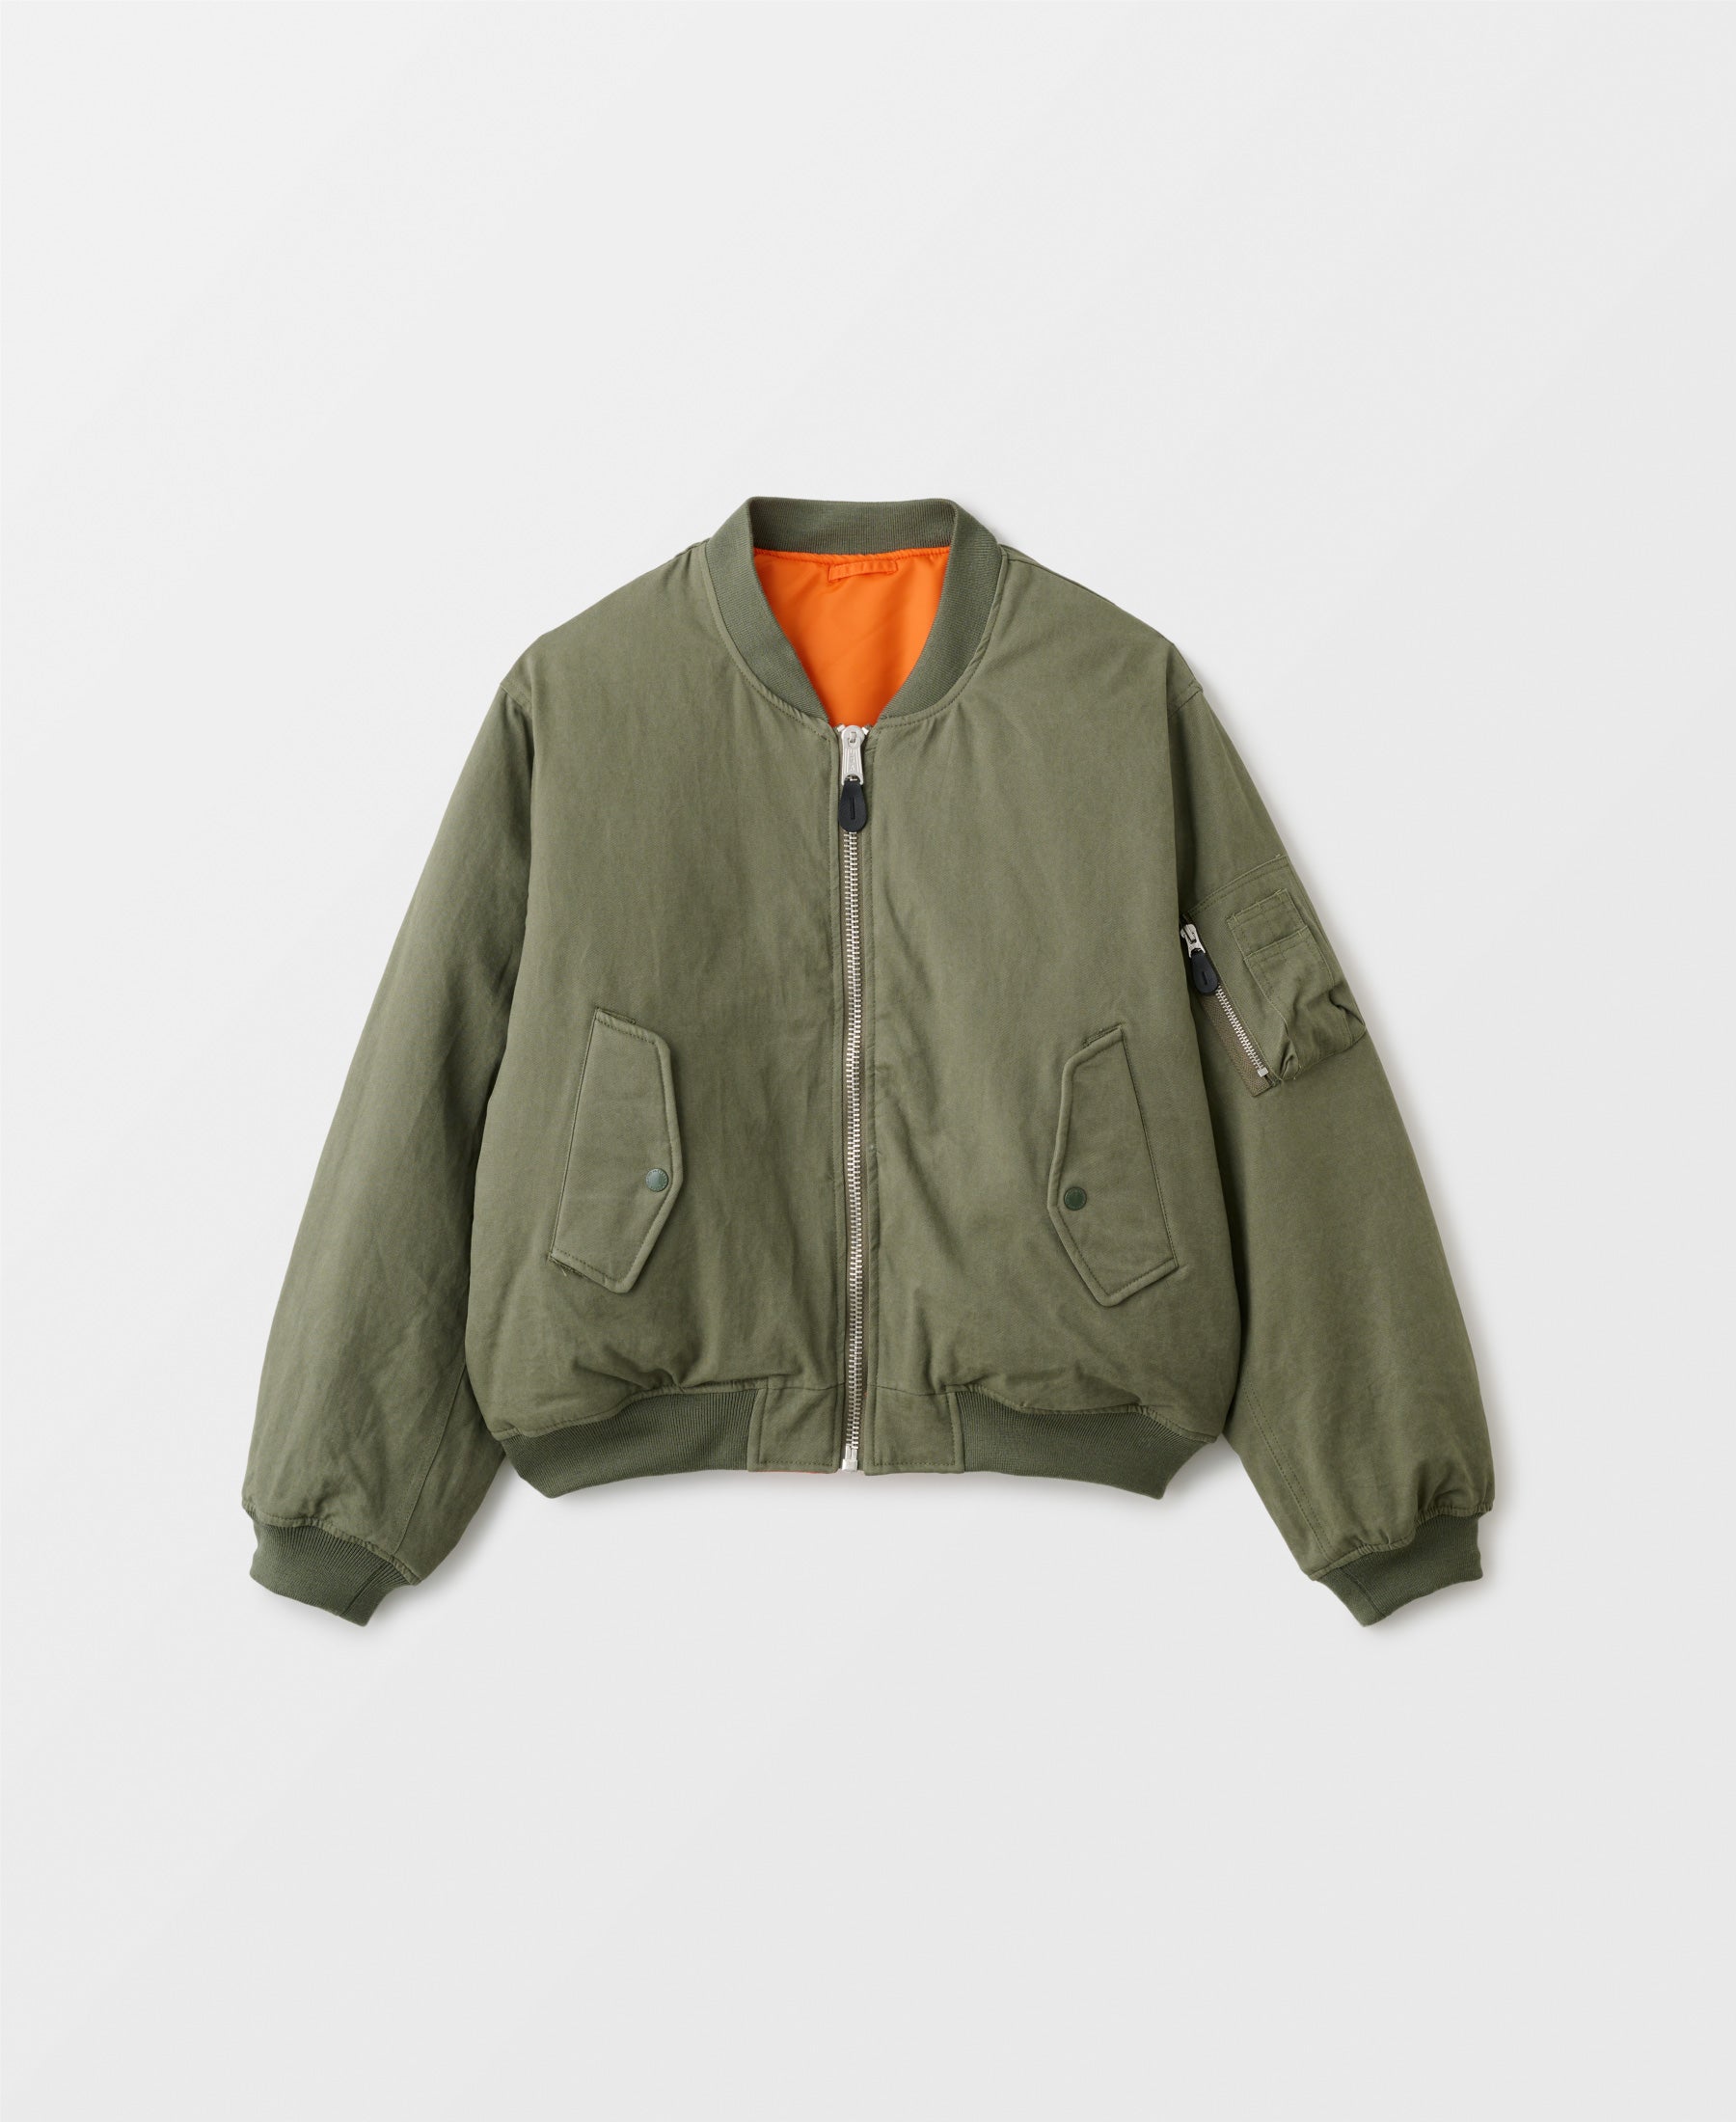 DOUBLE FACE COTTON BOMBER JACKET - OLIVE DRAB